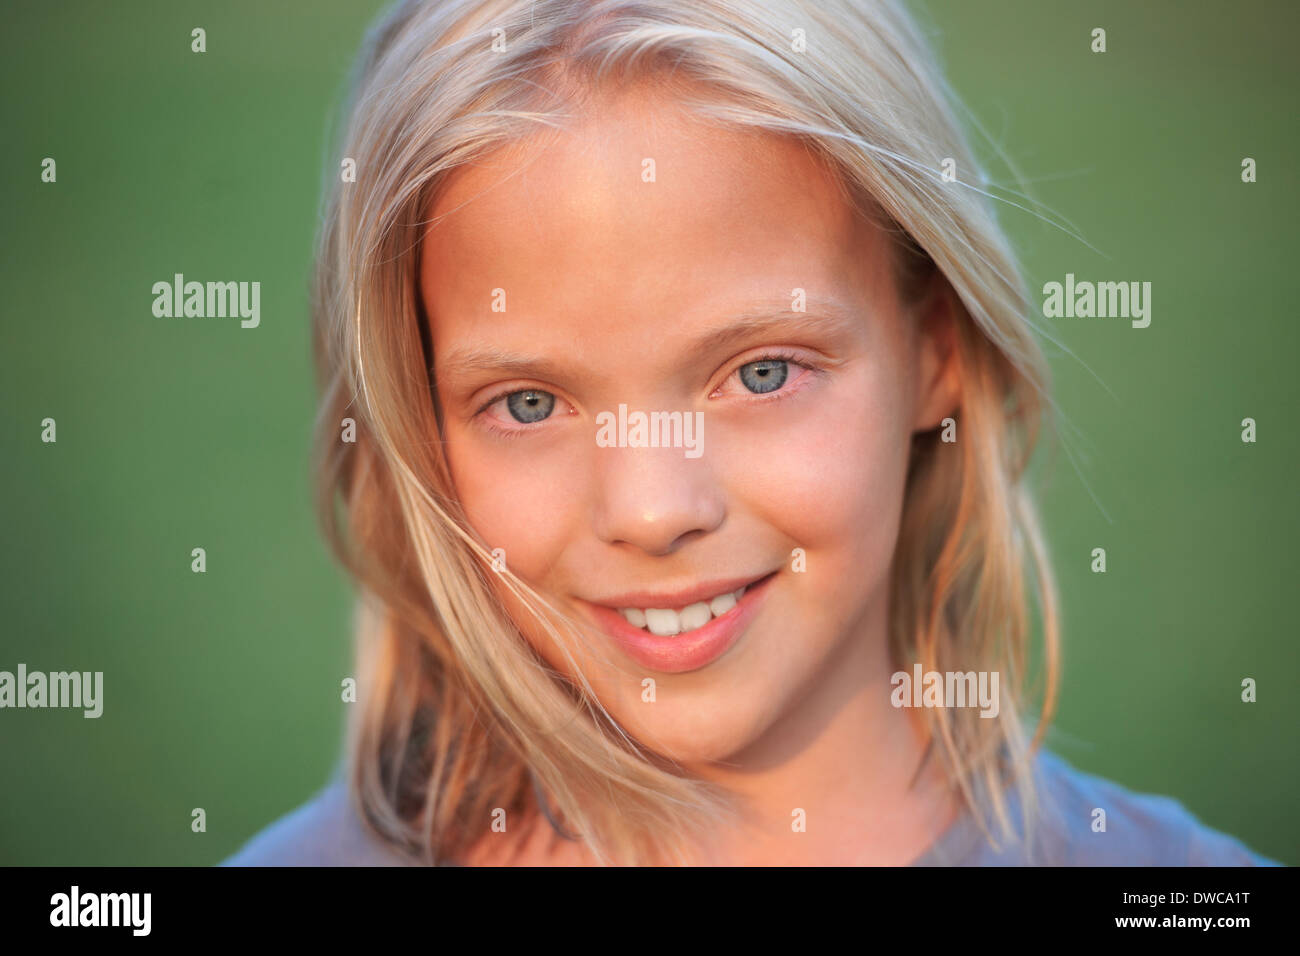 Close up portrait of girl with blond hair Stock Photo